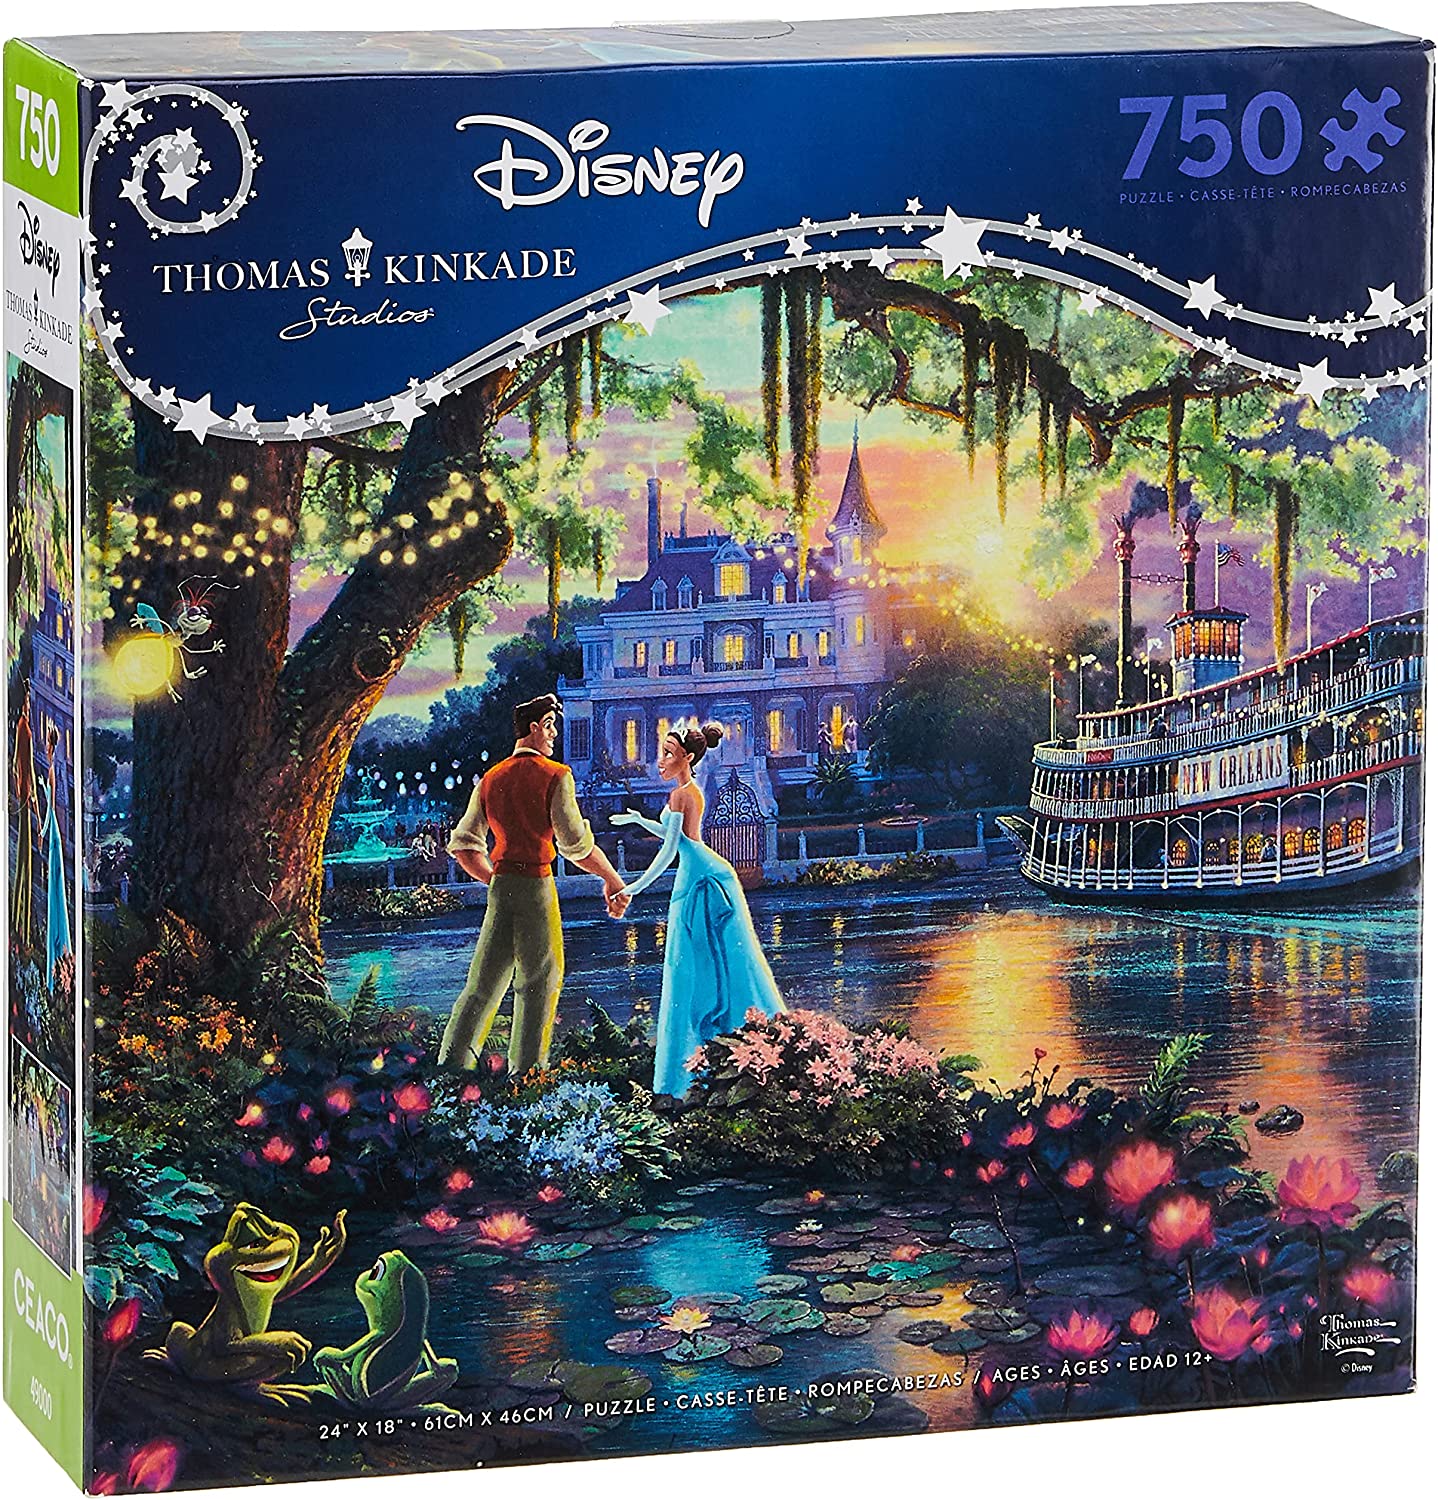 Ceaco - Thomas Kinkade - Disney Dreams Collection - The Princess and The Frog - 750 Piece Jigsaw Puzzle